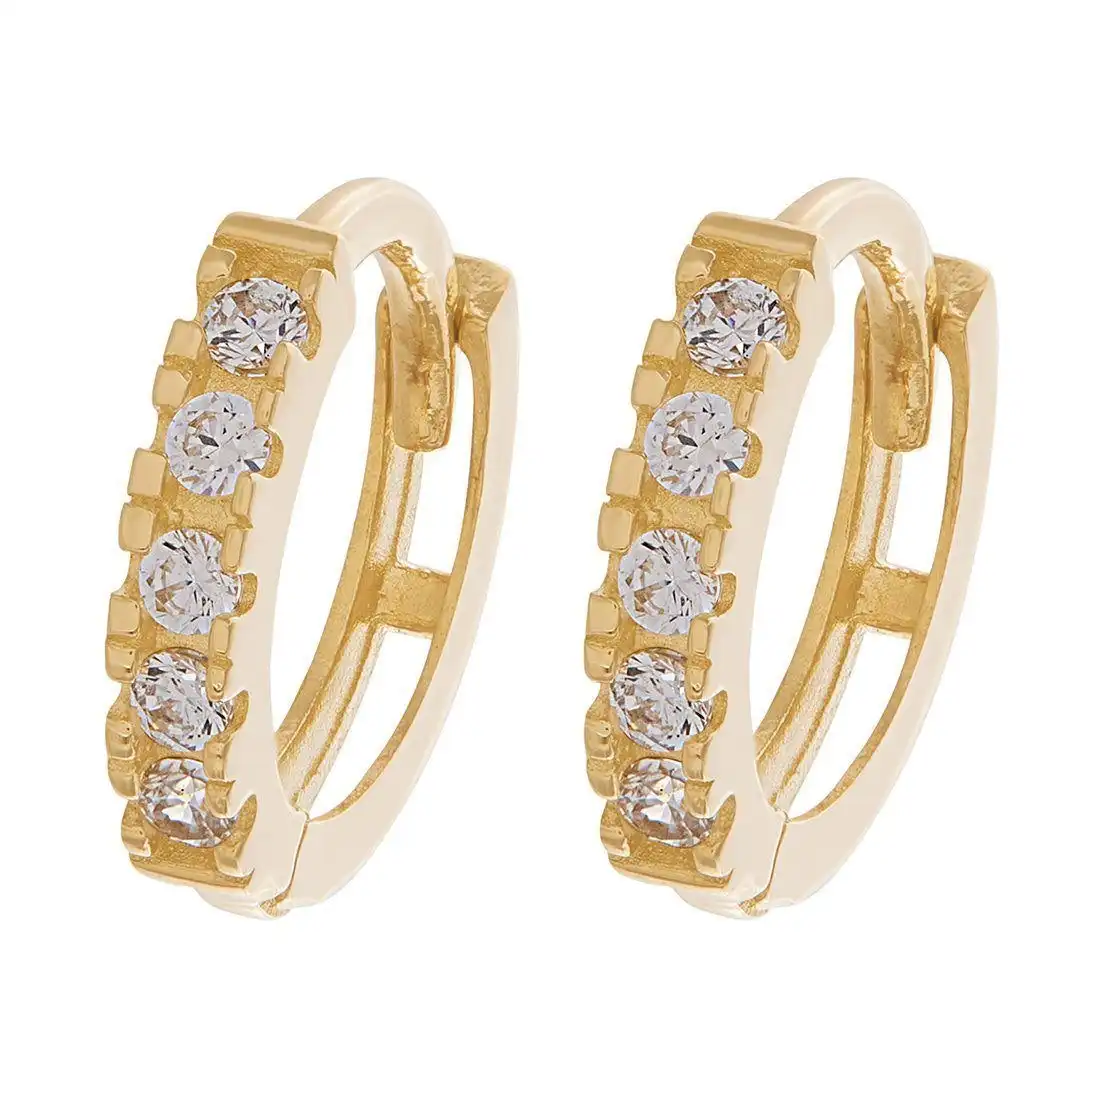 9ct Yellow Gold 9MM Hoop Earrings with Cubic Zirconia